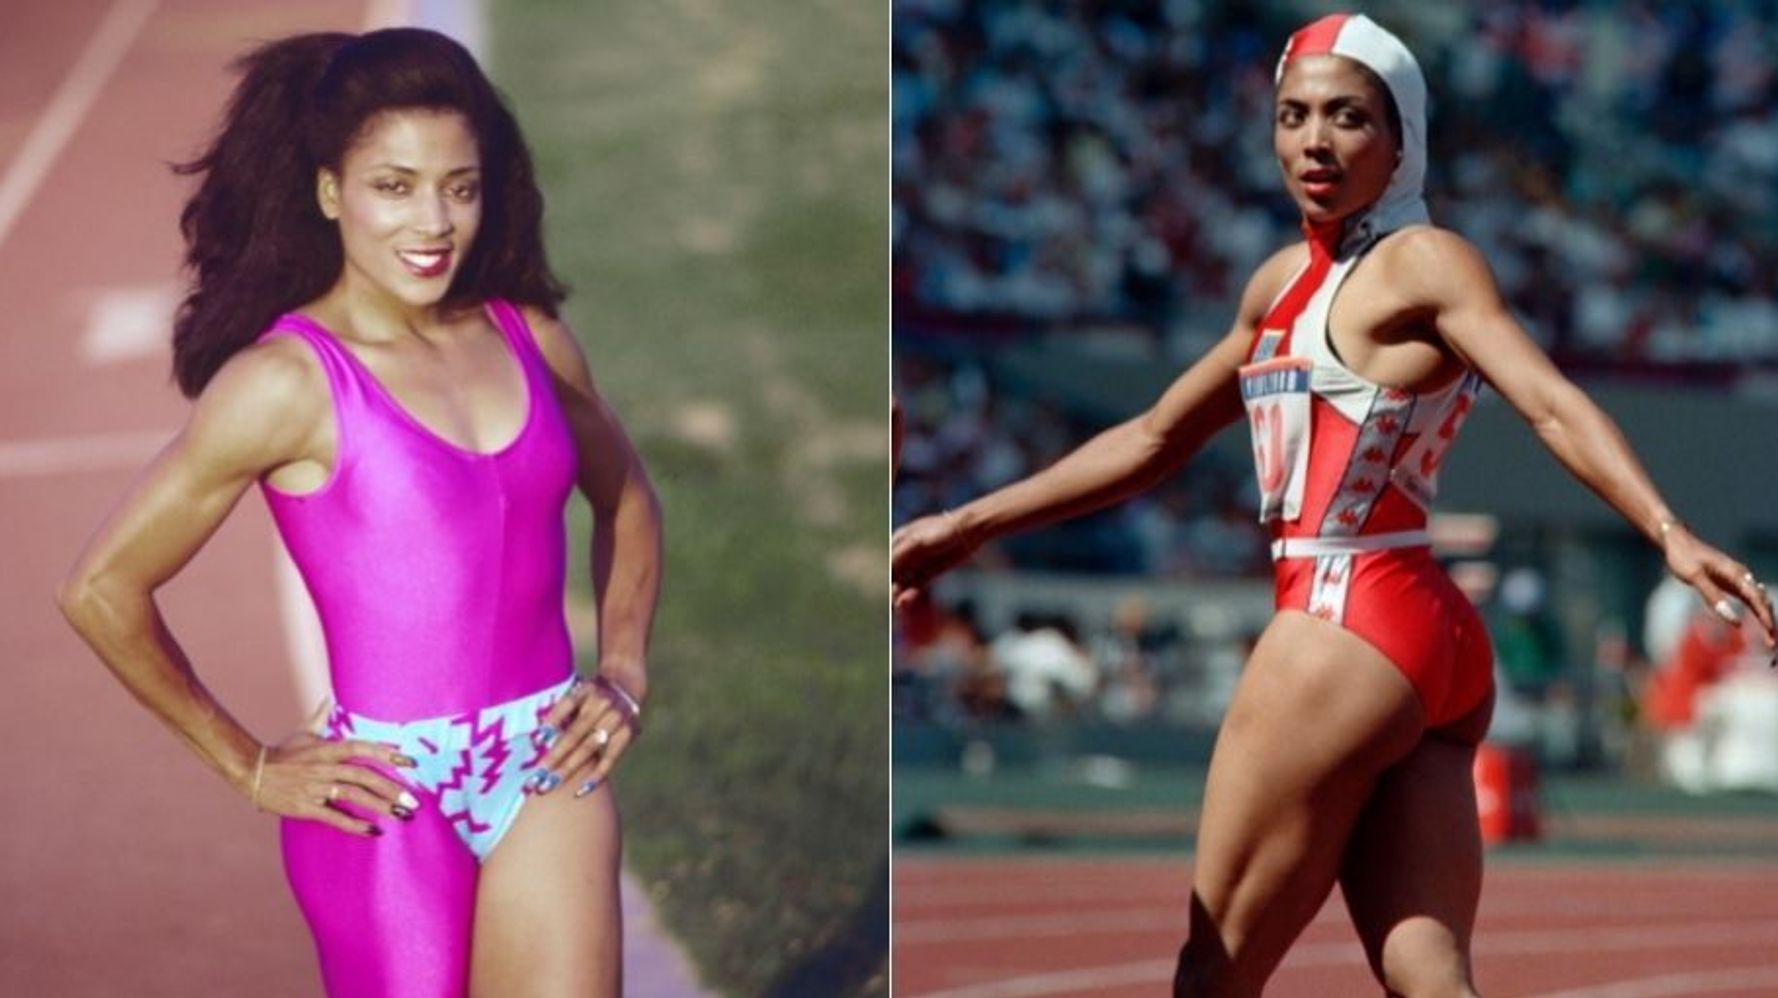 The Story Behind the Flo-Jo's